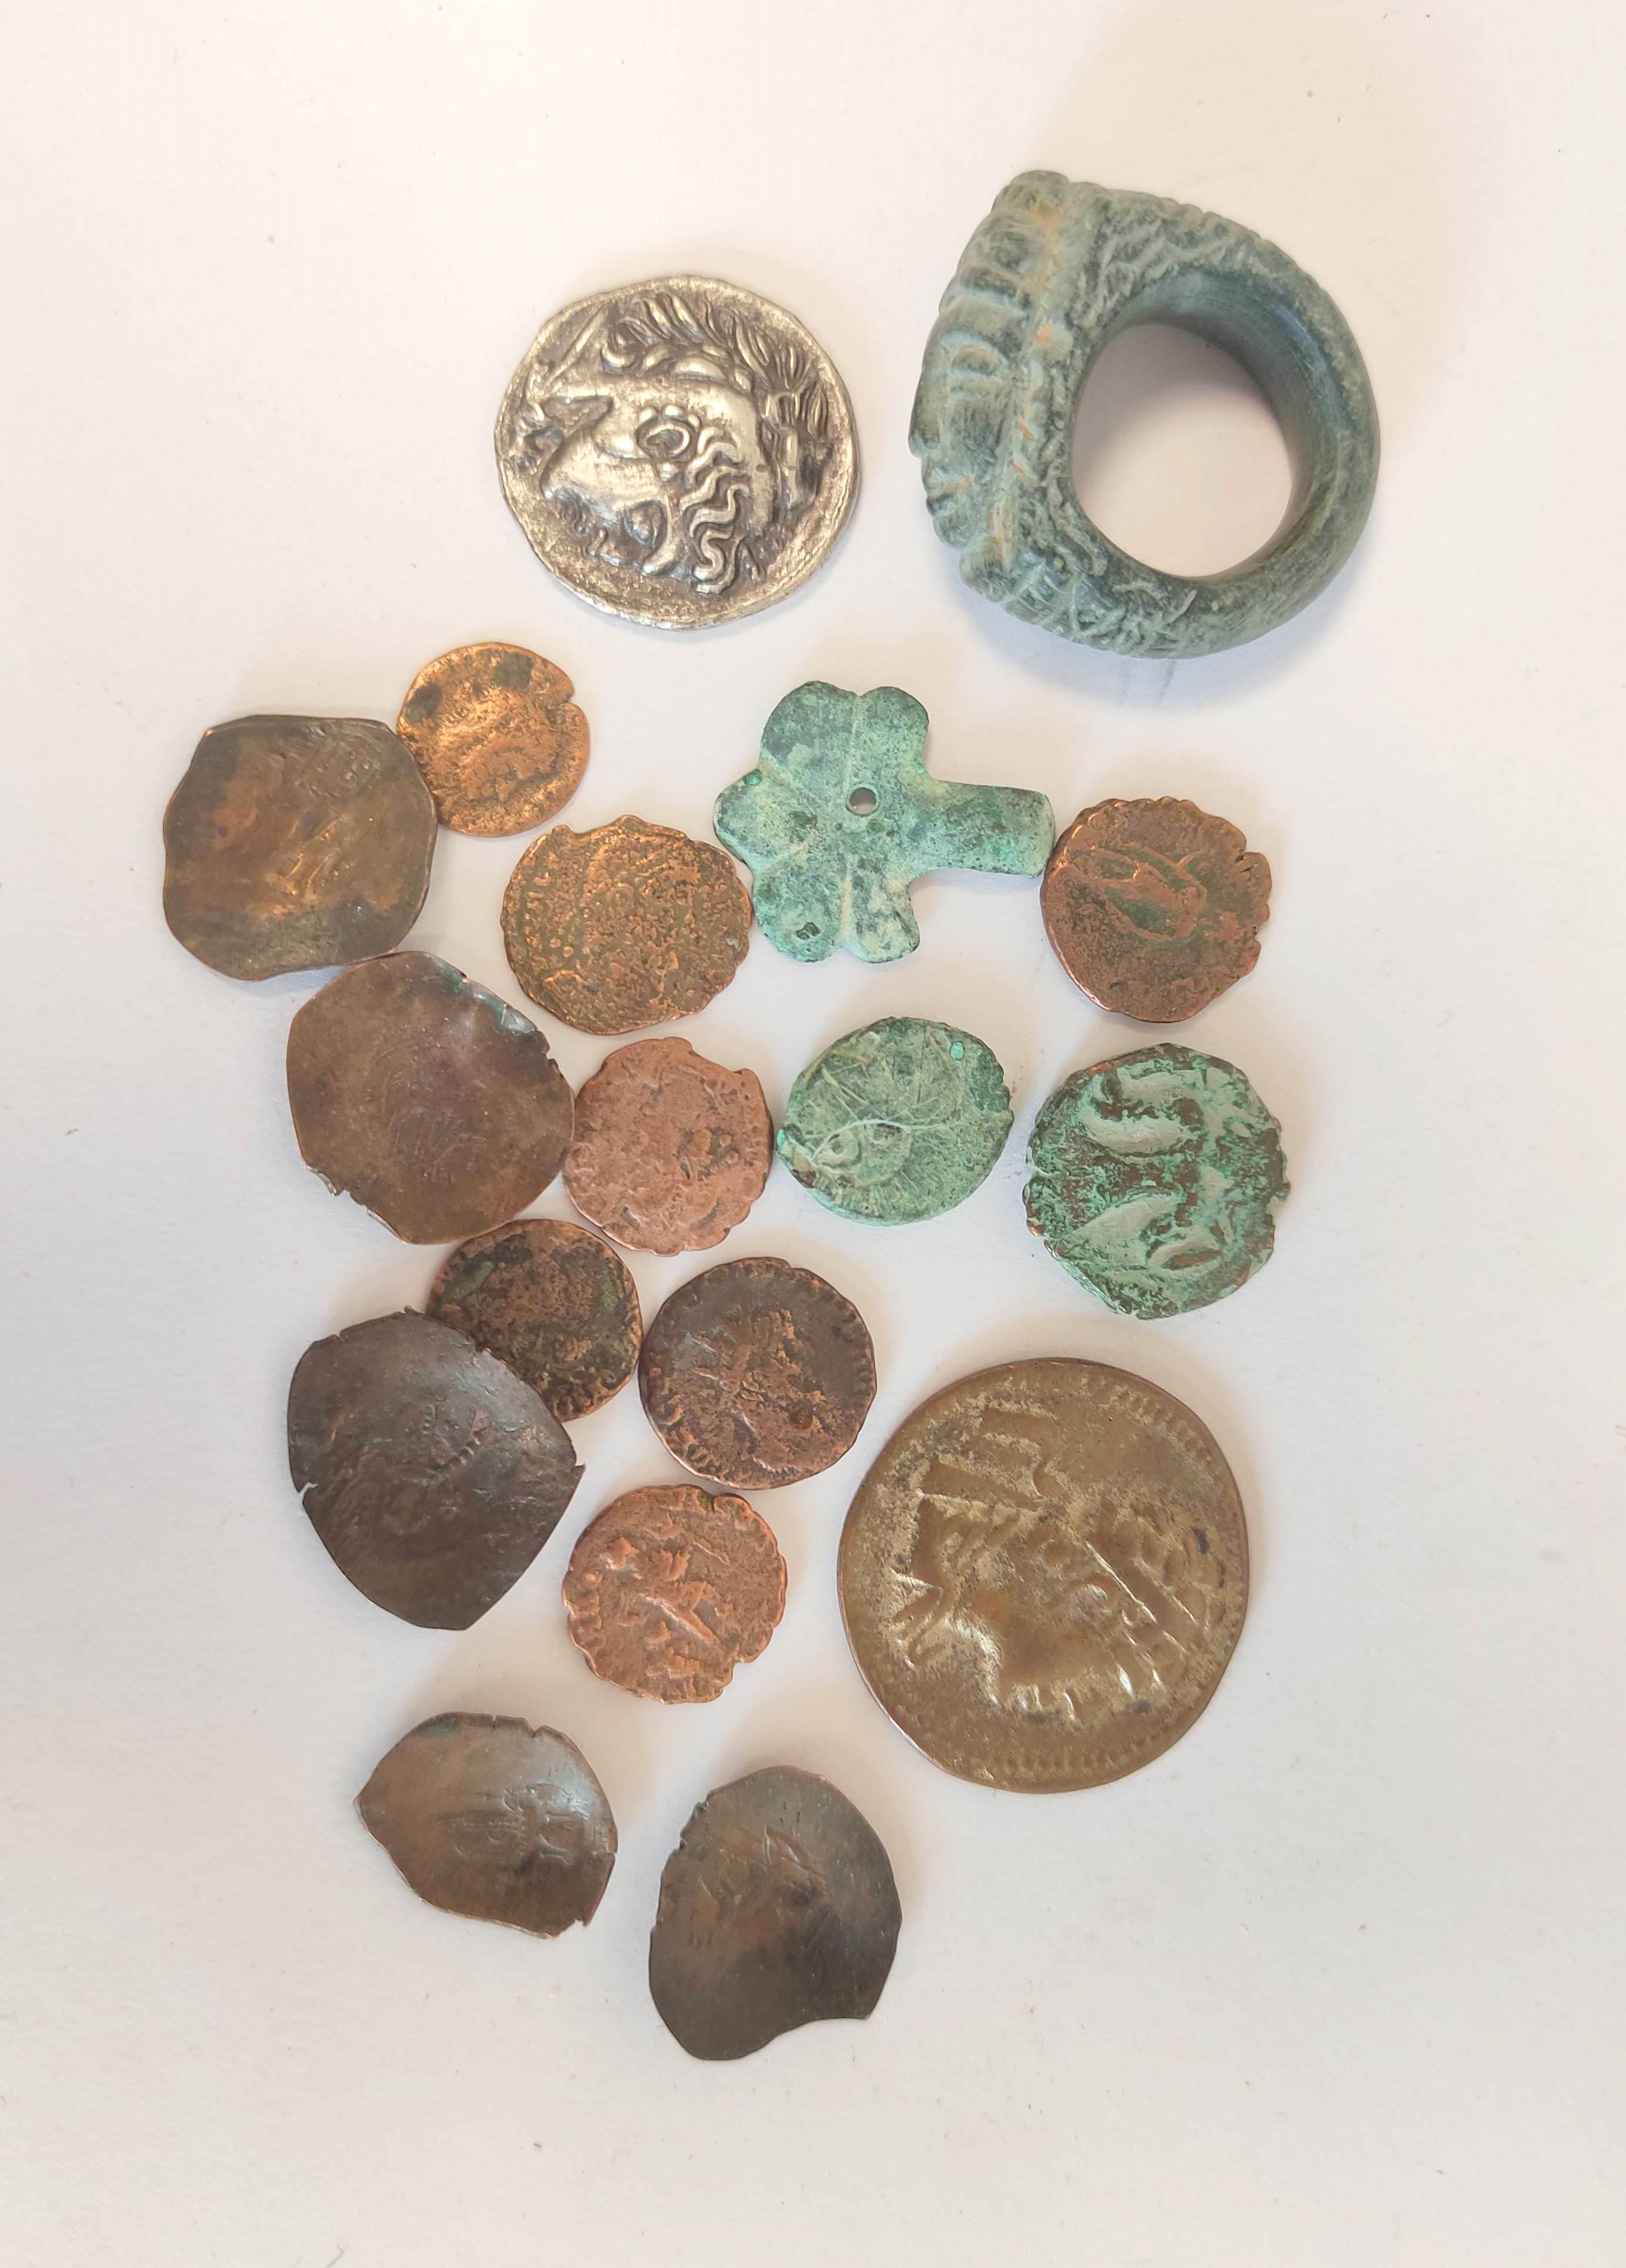 Antiquarian coins to include seven Roman copper AS coins, a Macedonian tetradrachm, five Byzantine